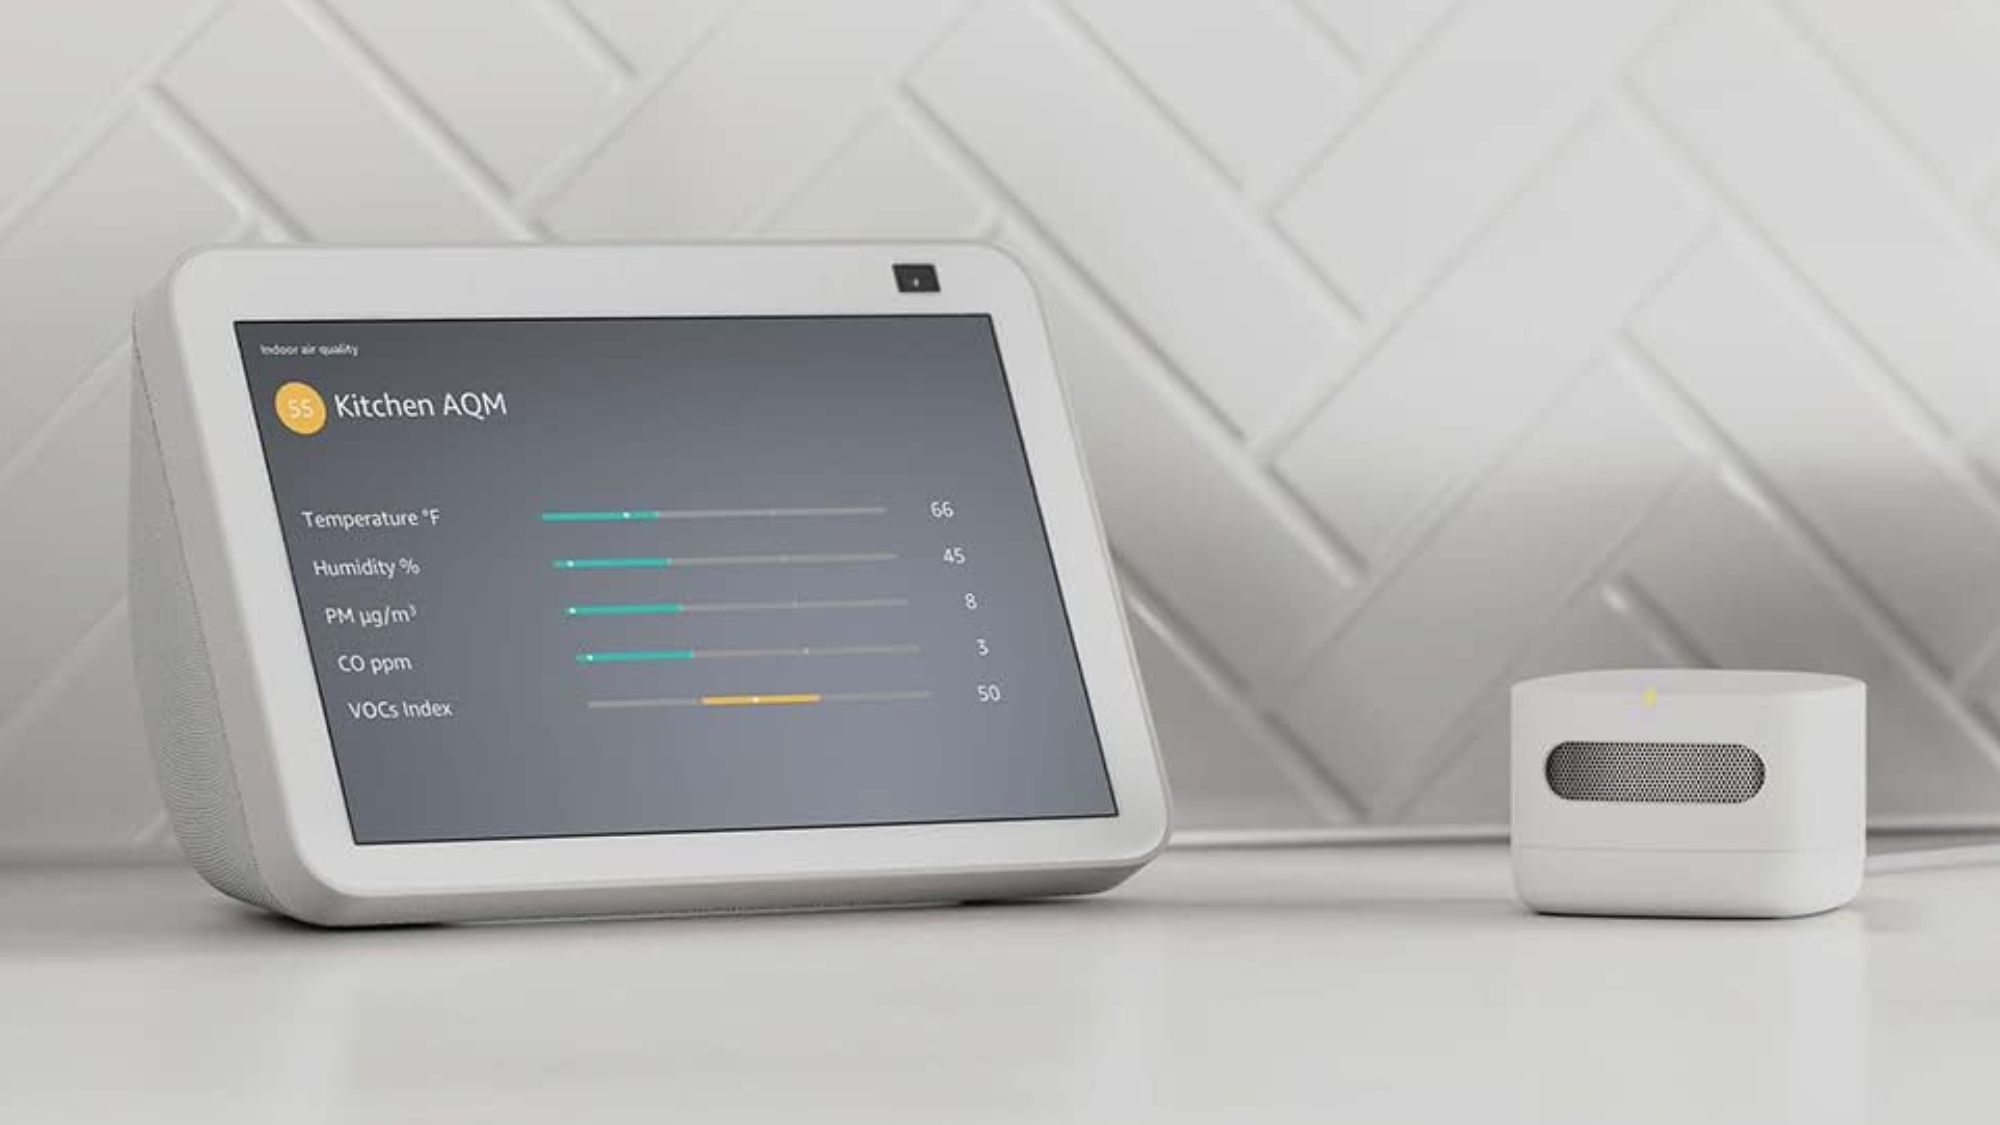 Amazon smart air quality monitor sitting on table with Echo Show displaying air score